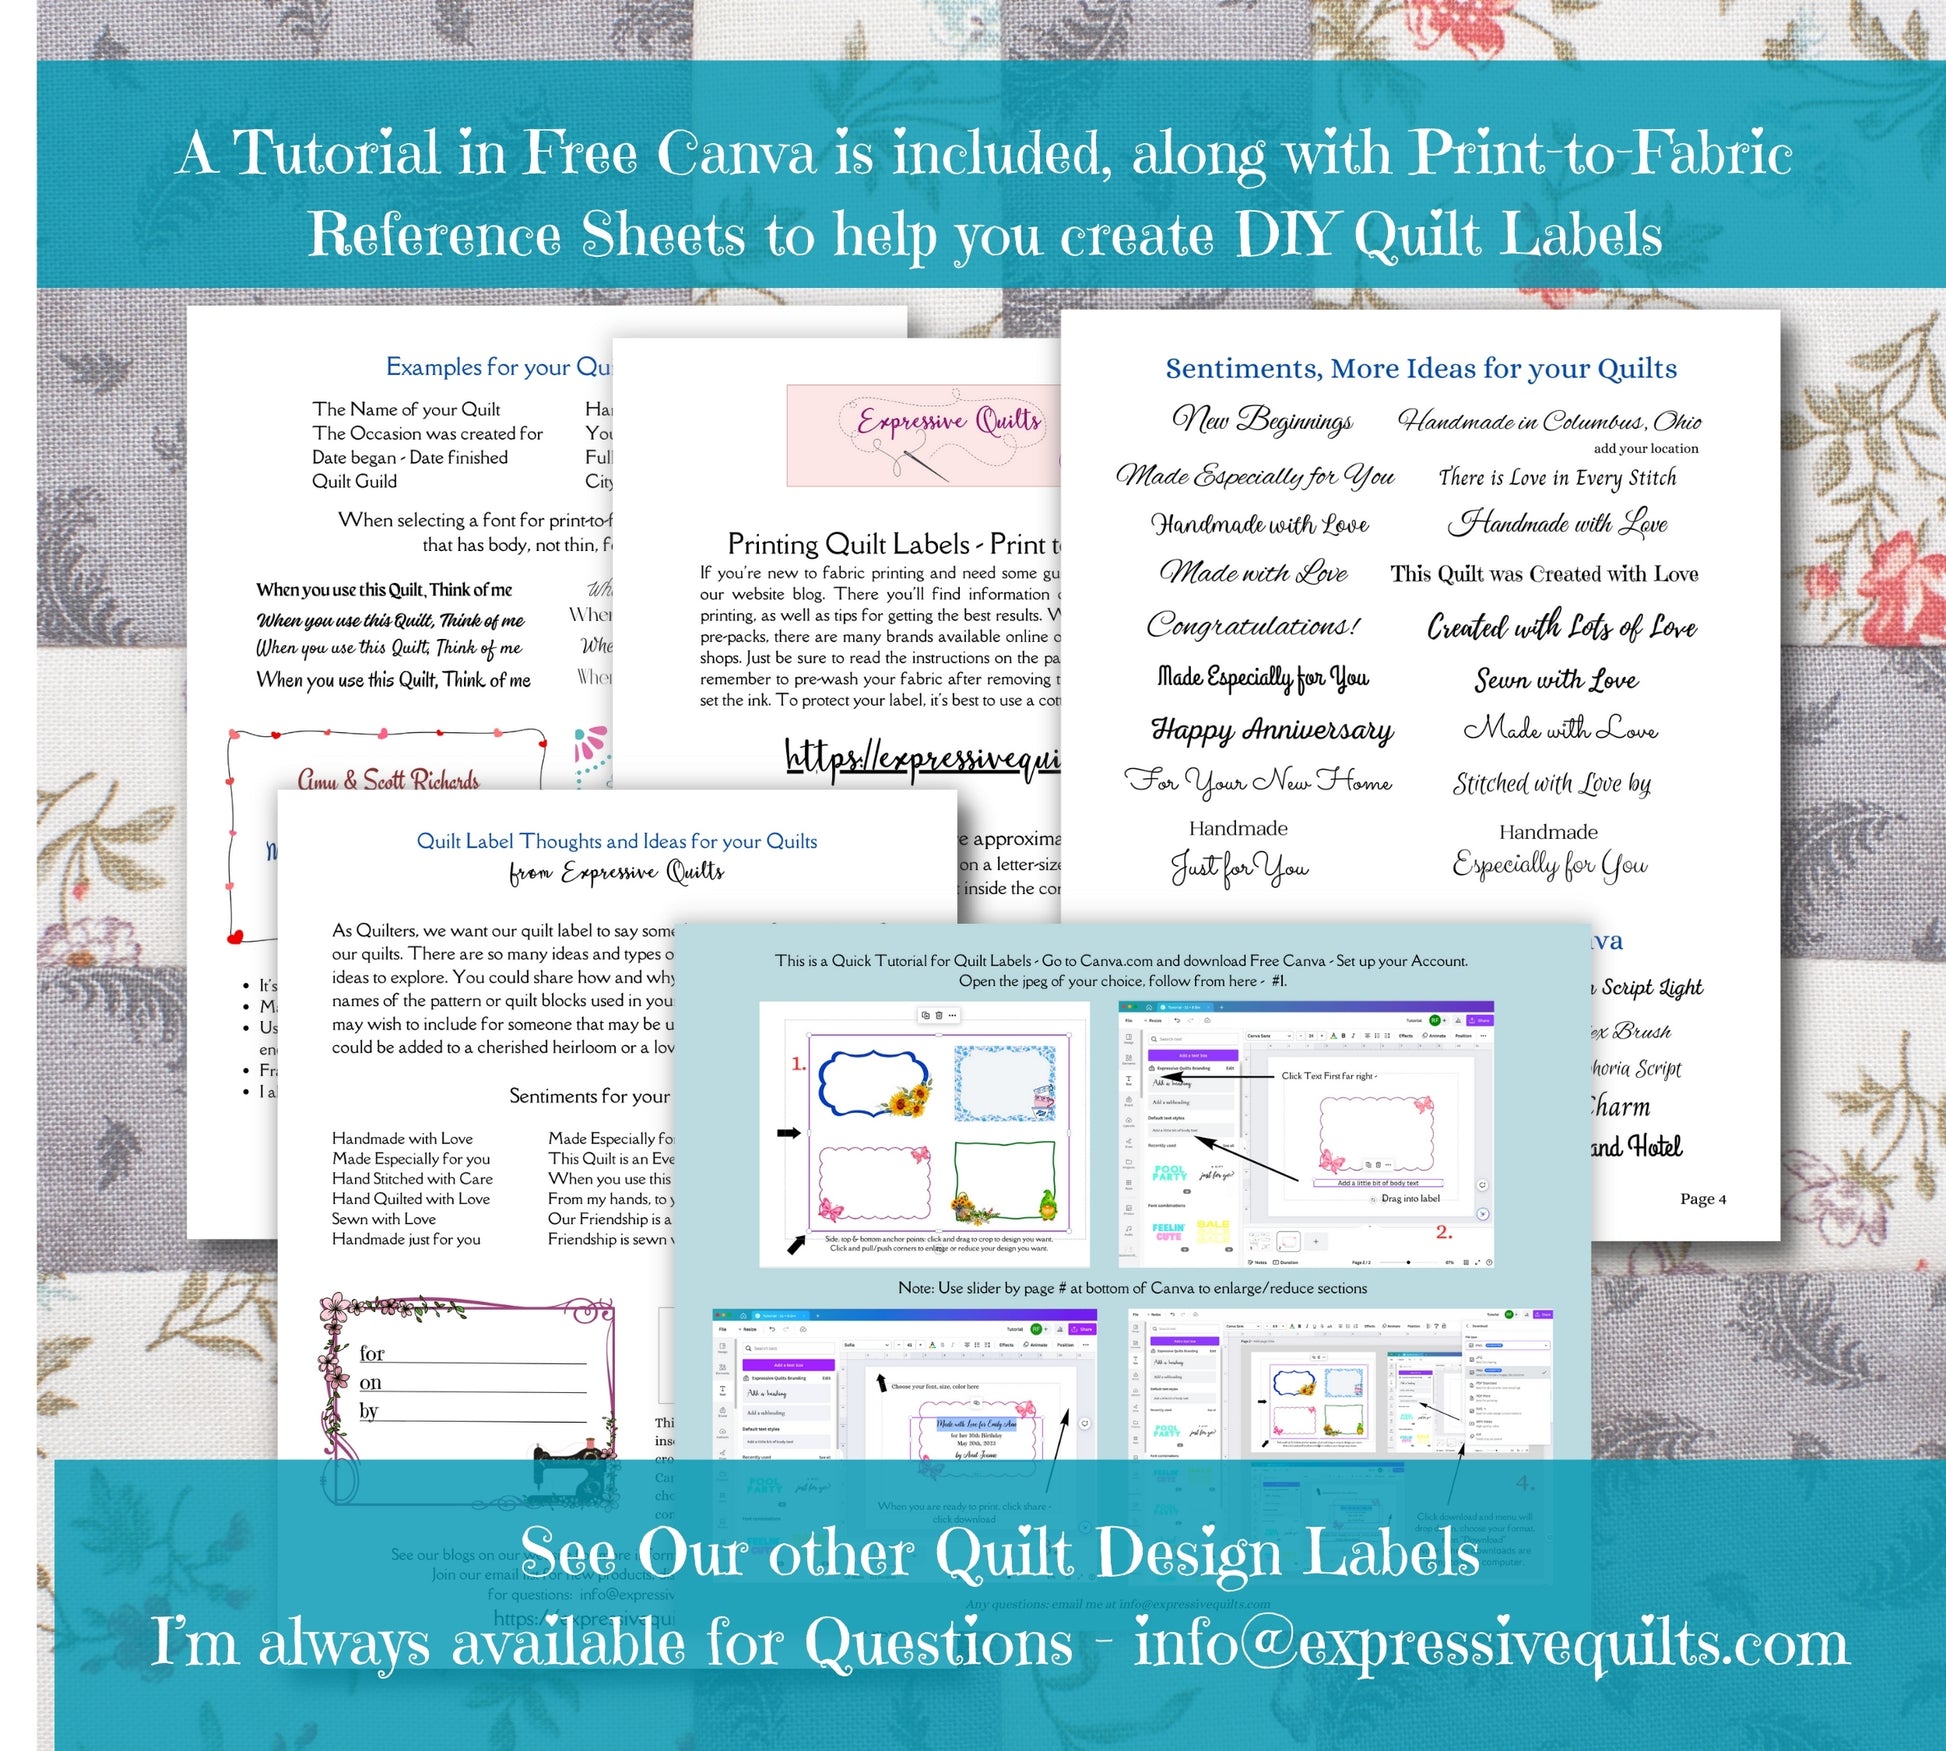 quilt labels reference 5 sheets - how to print to fabric